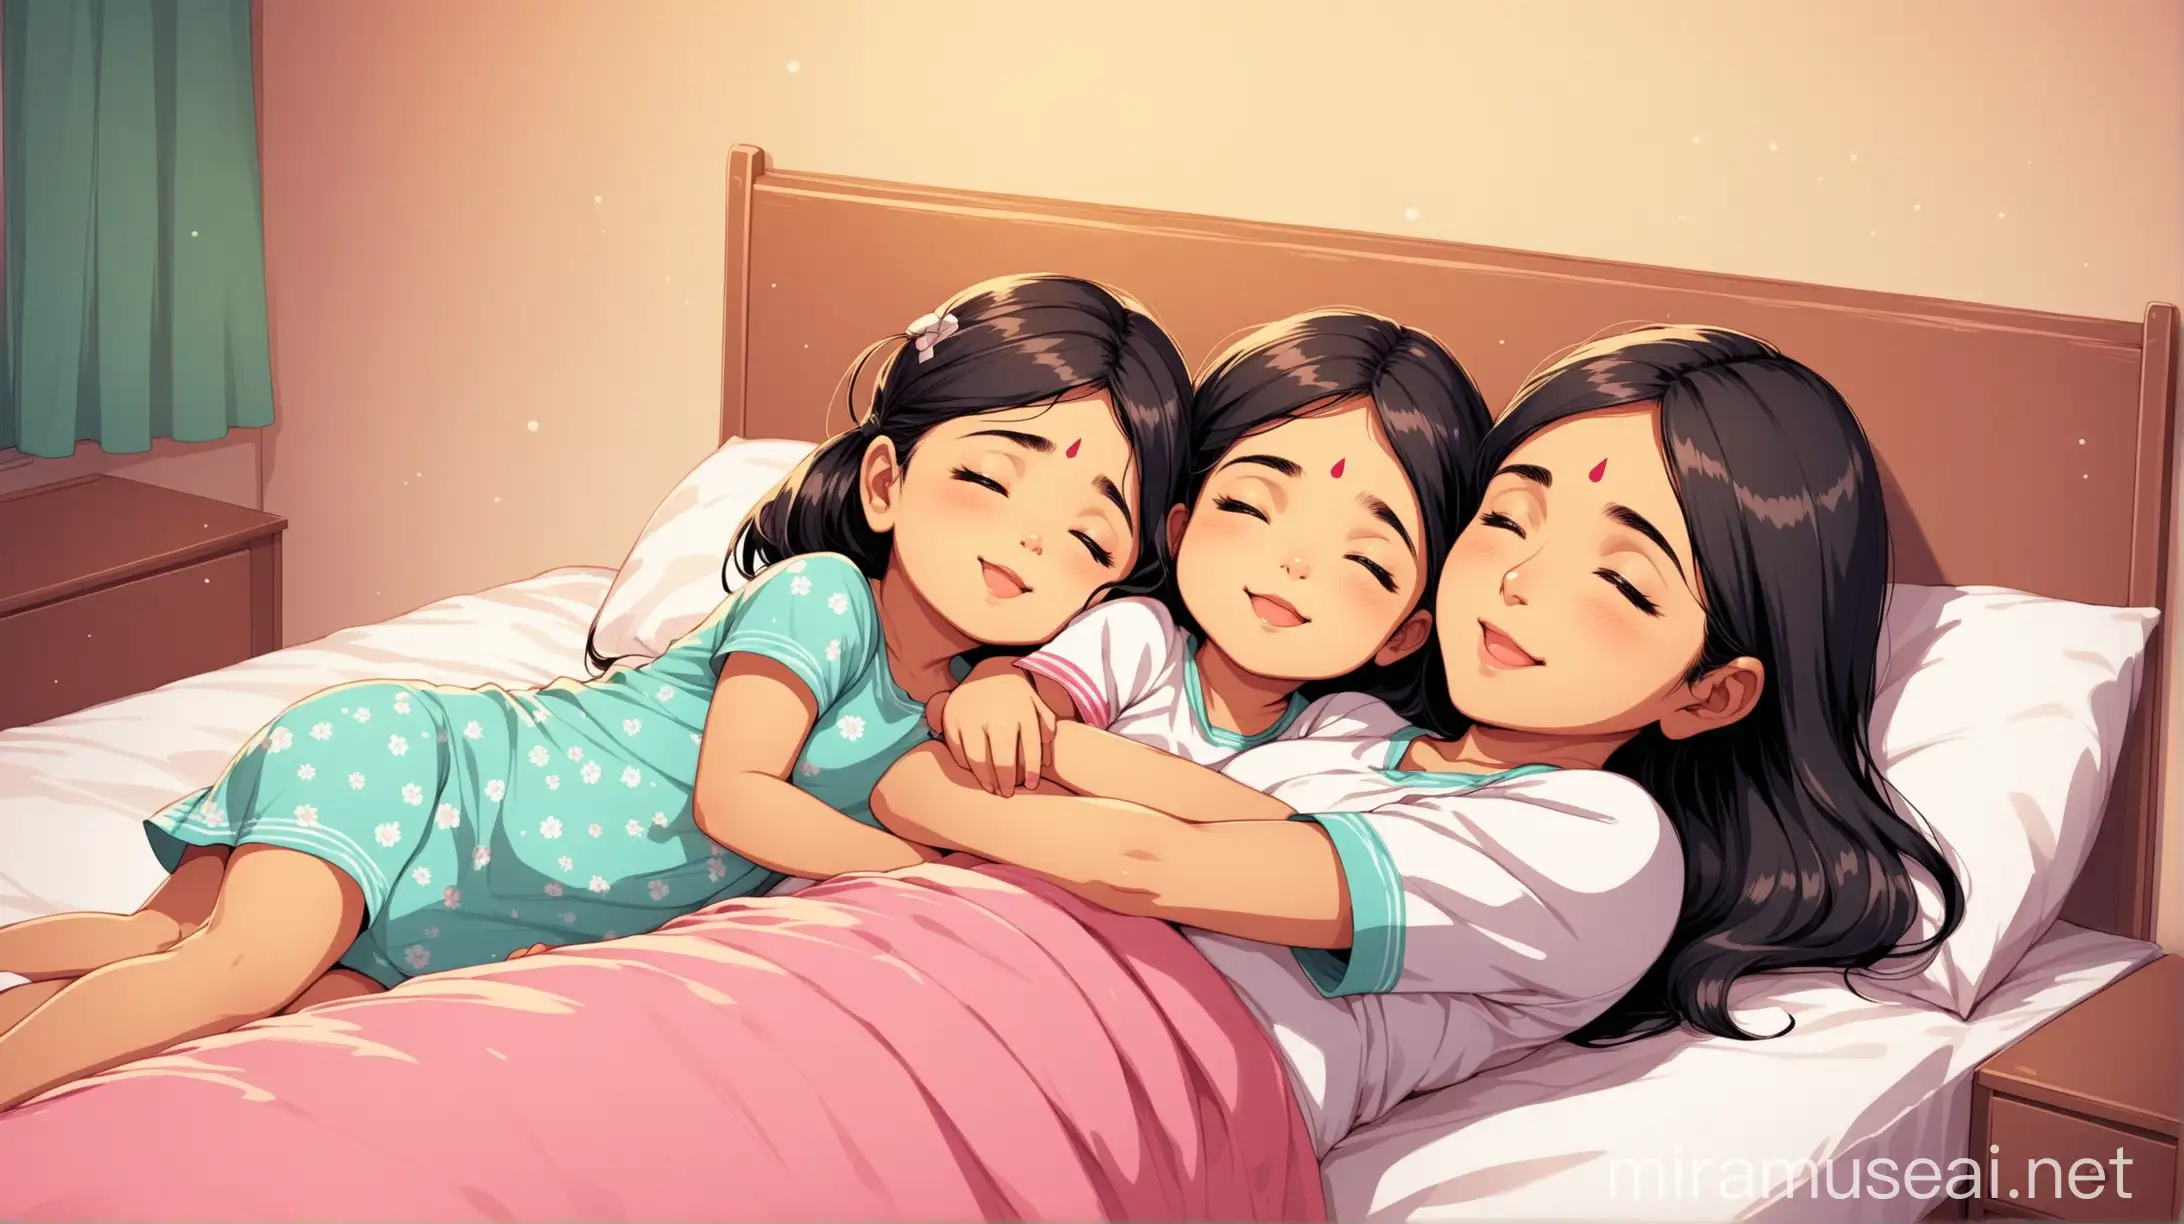 Indian modern nuclear family: Two small daughters are sleeping. Mother happily waking them up in the bedroom